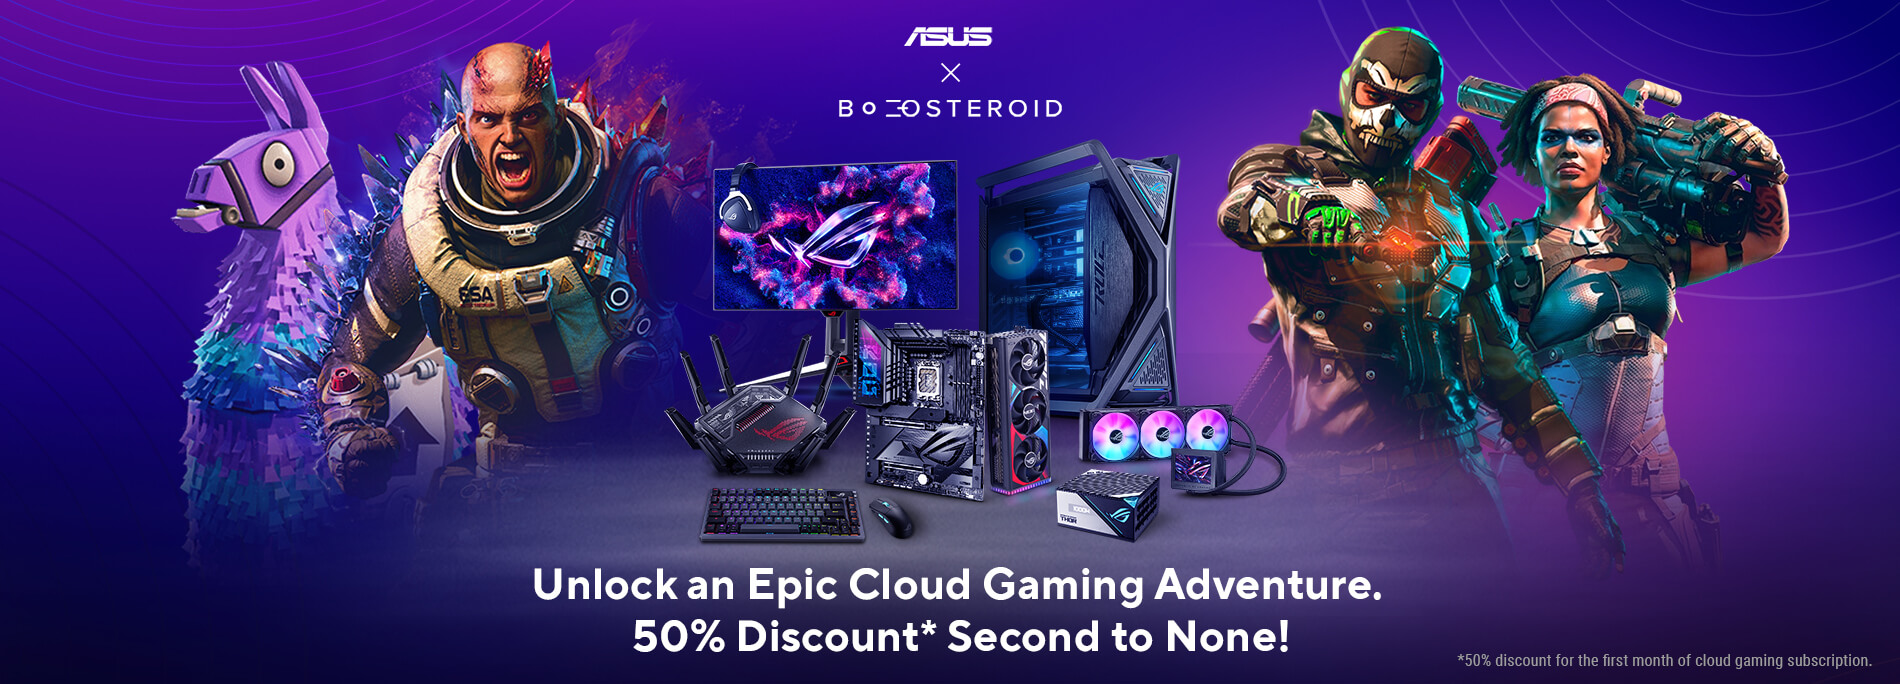 ASUS x Boosteroid Cloud Gaming Discount Redemption